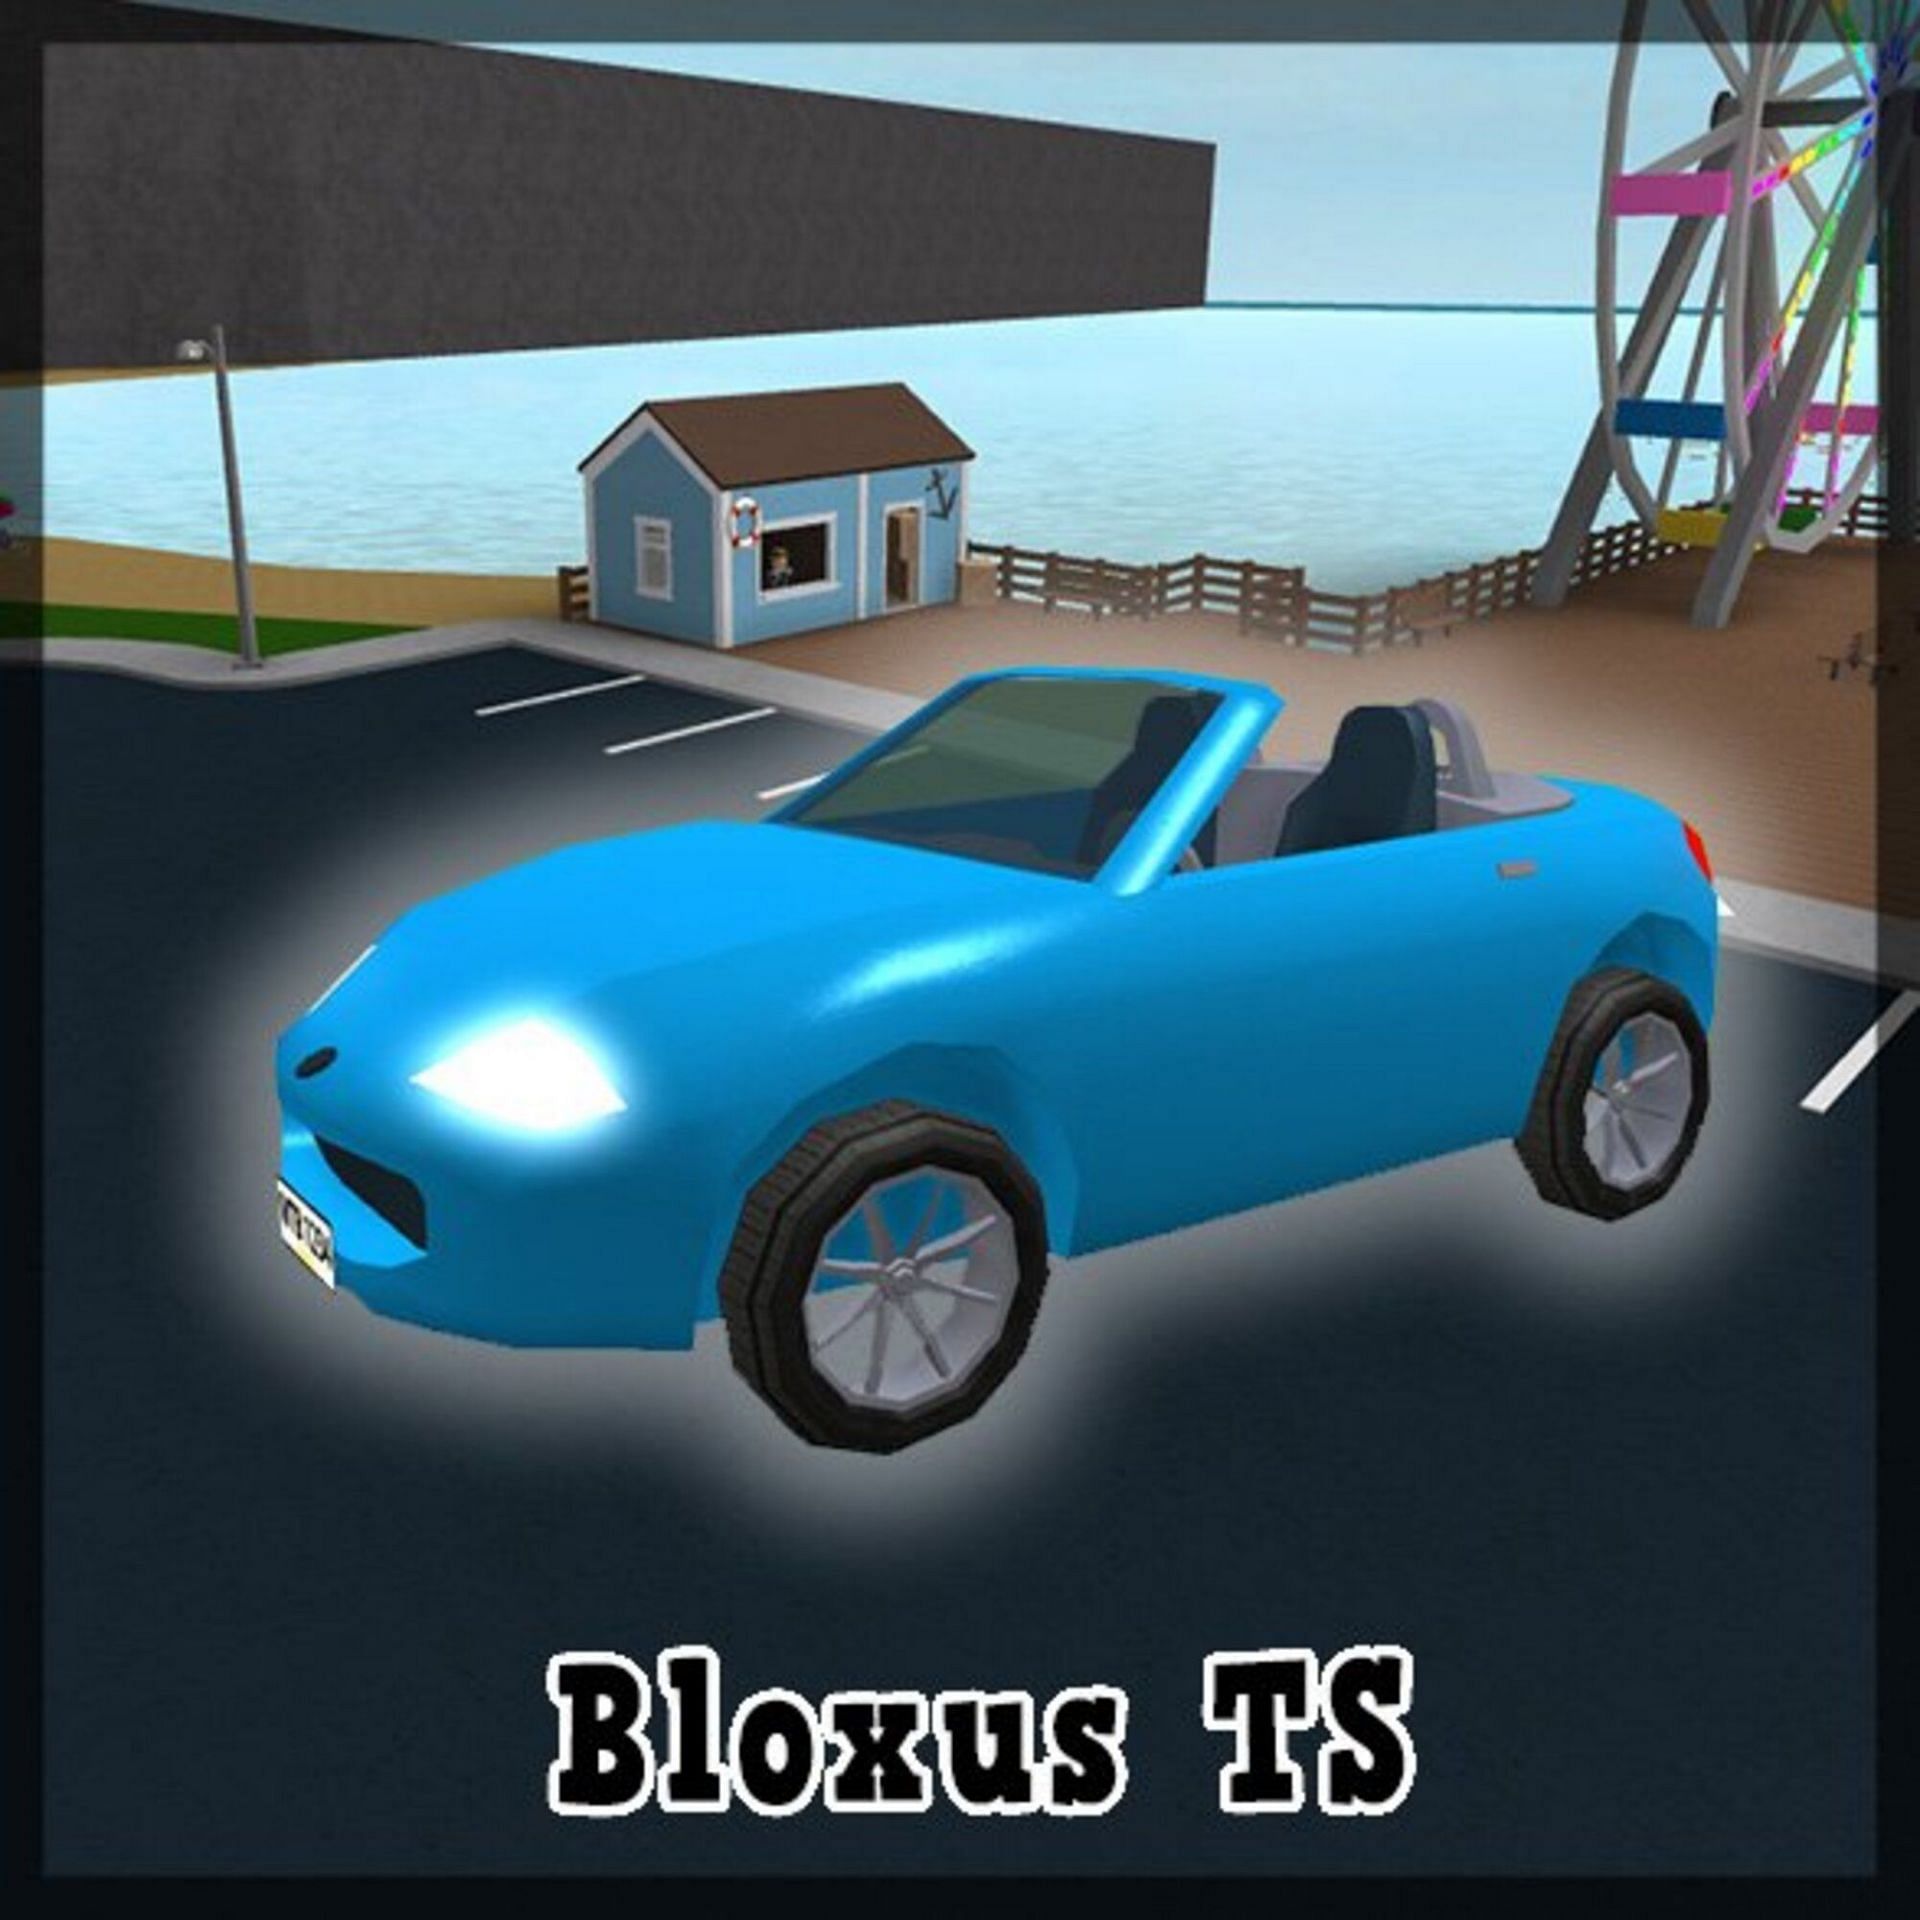 An Image of the fastest car, Bloxus TS in-game (Image via Twitter)